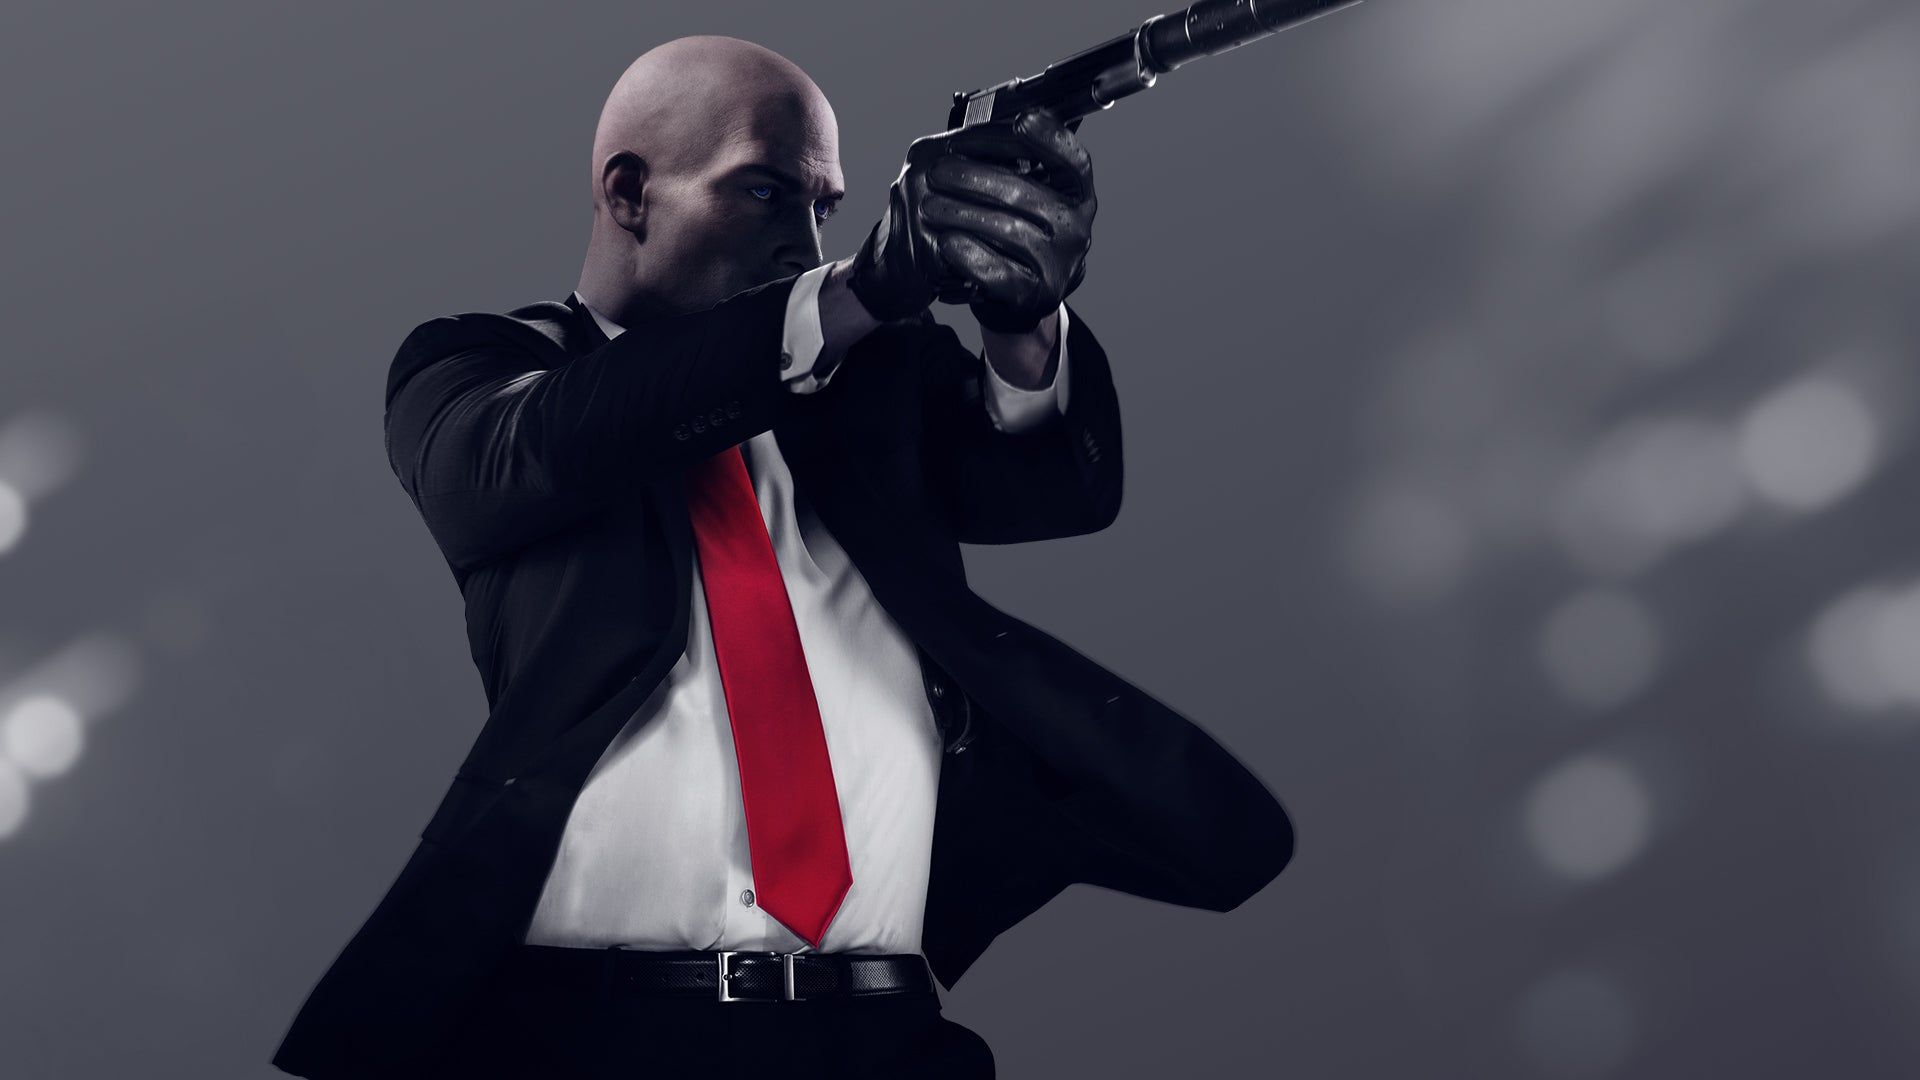 Hitman 3 will see the world of assassination return in January 2021 on PS5